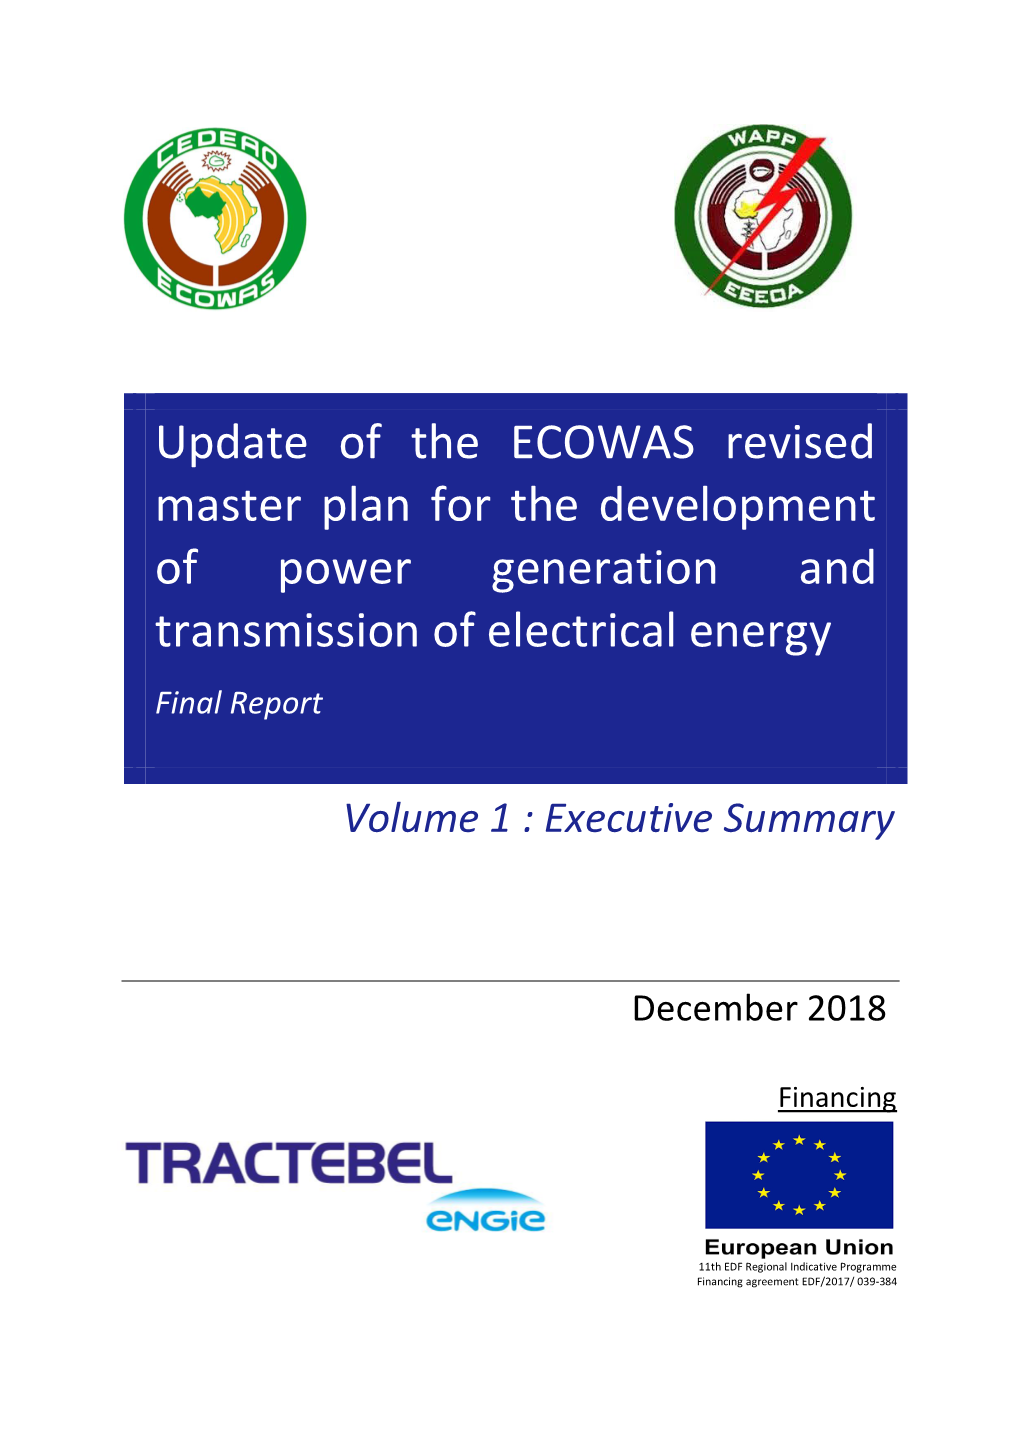 Update of the ECOWAS Revised Master Plan for the Development of Power Generation and Transmission of Electrical Energy Final Report